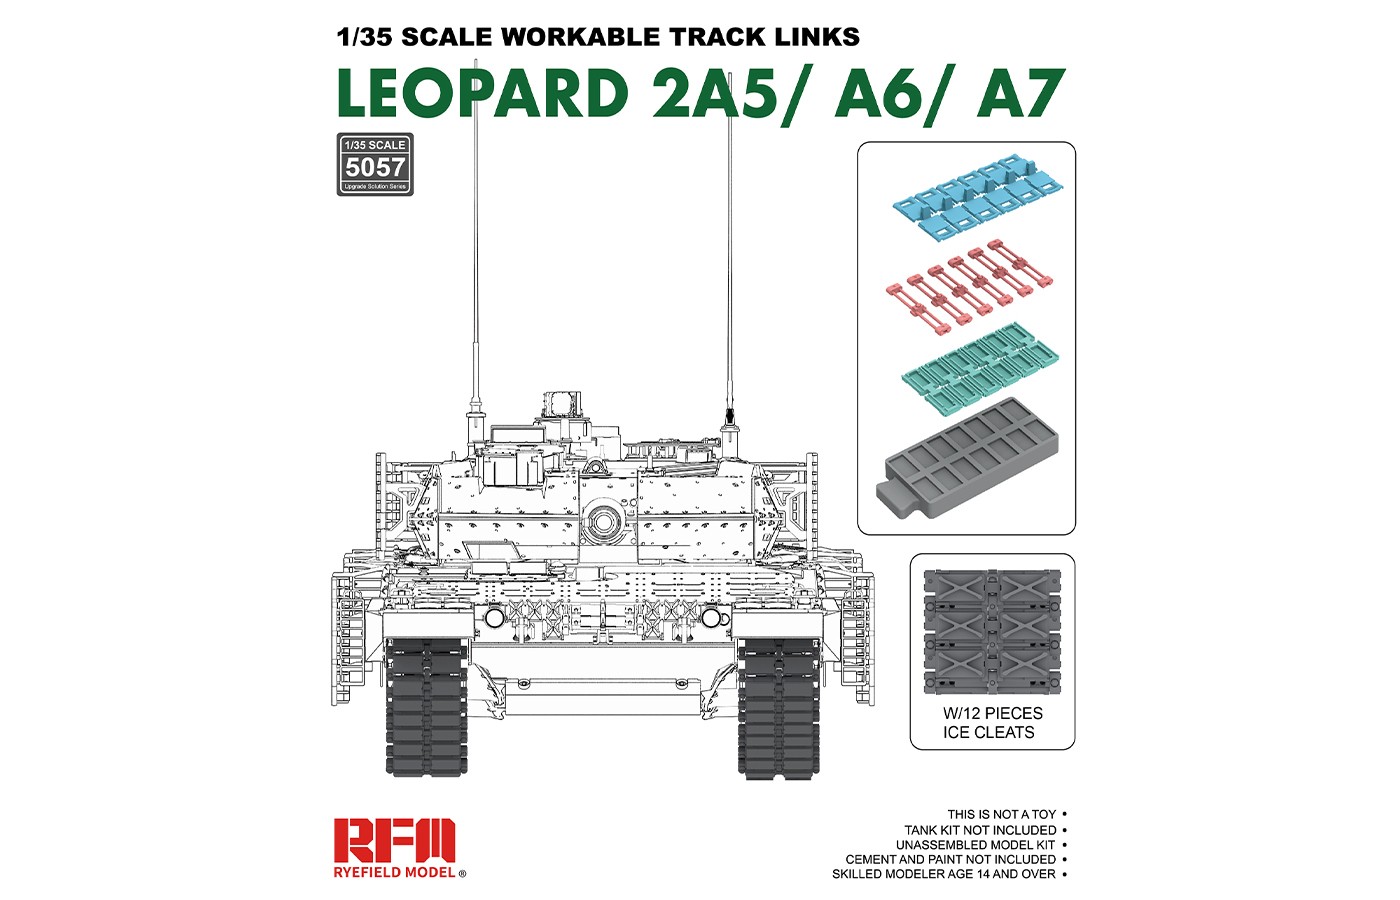 RM-5057  траки наборные  Workable Track Links for Leopard 2A5/A6/A7  (1:35)